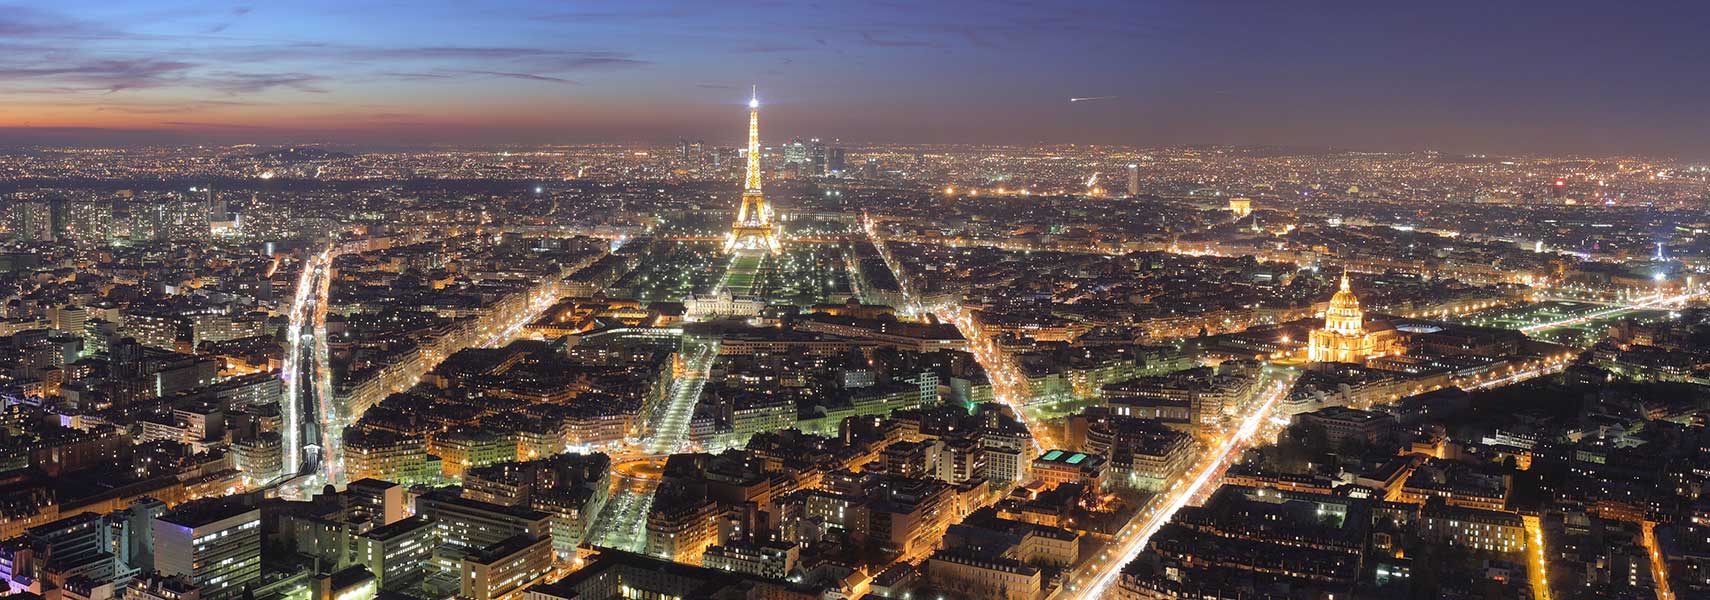 Paris at Night, view from the Maine-Montparnasse tower